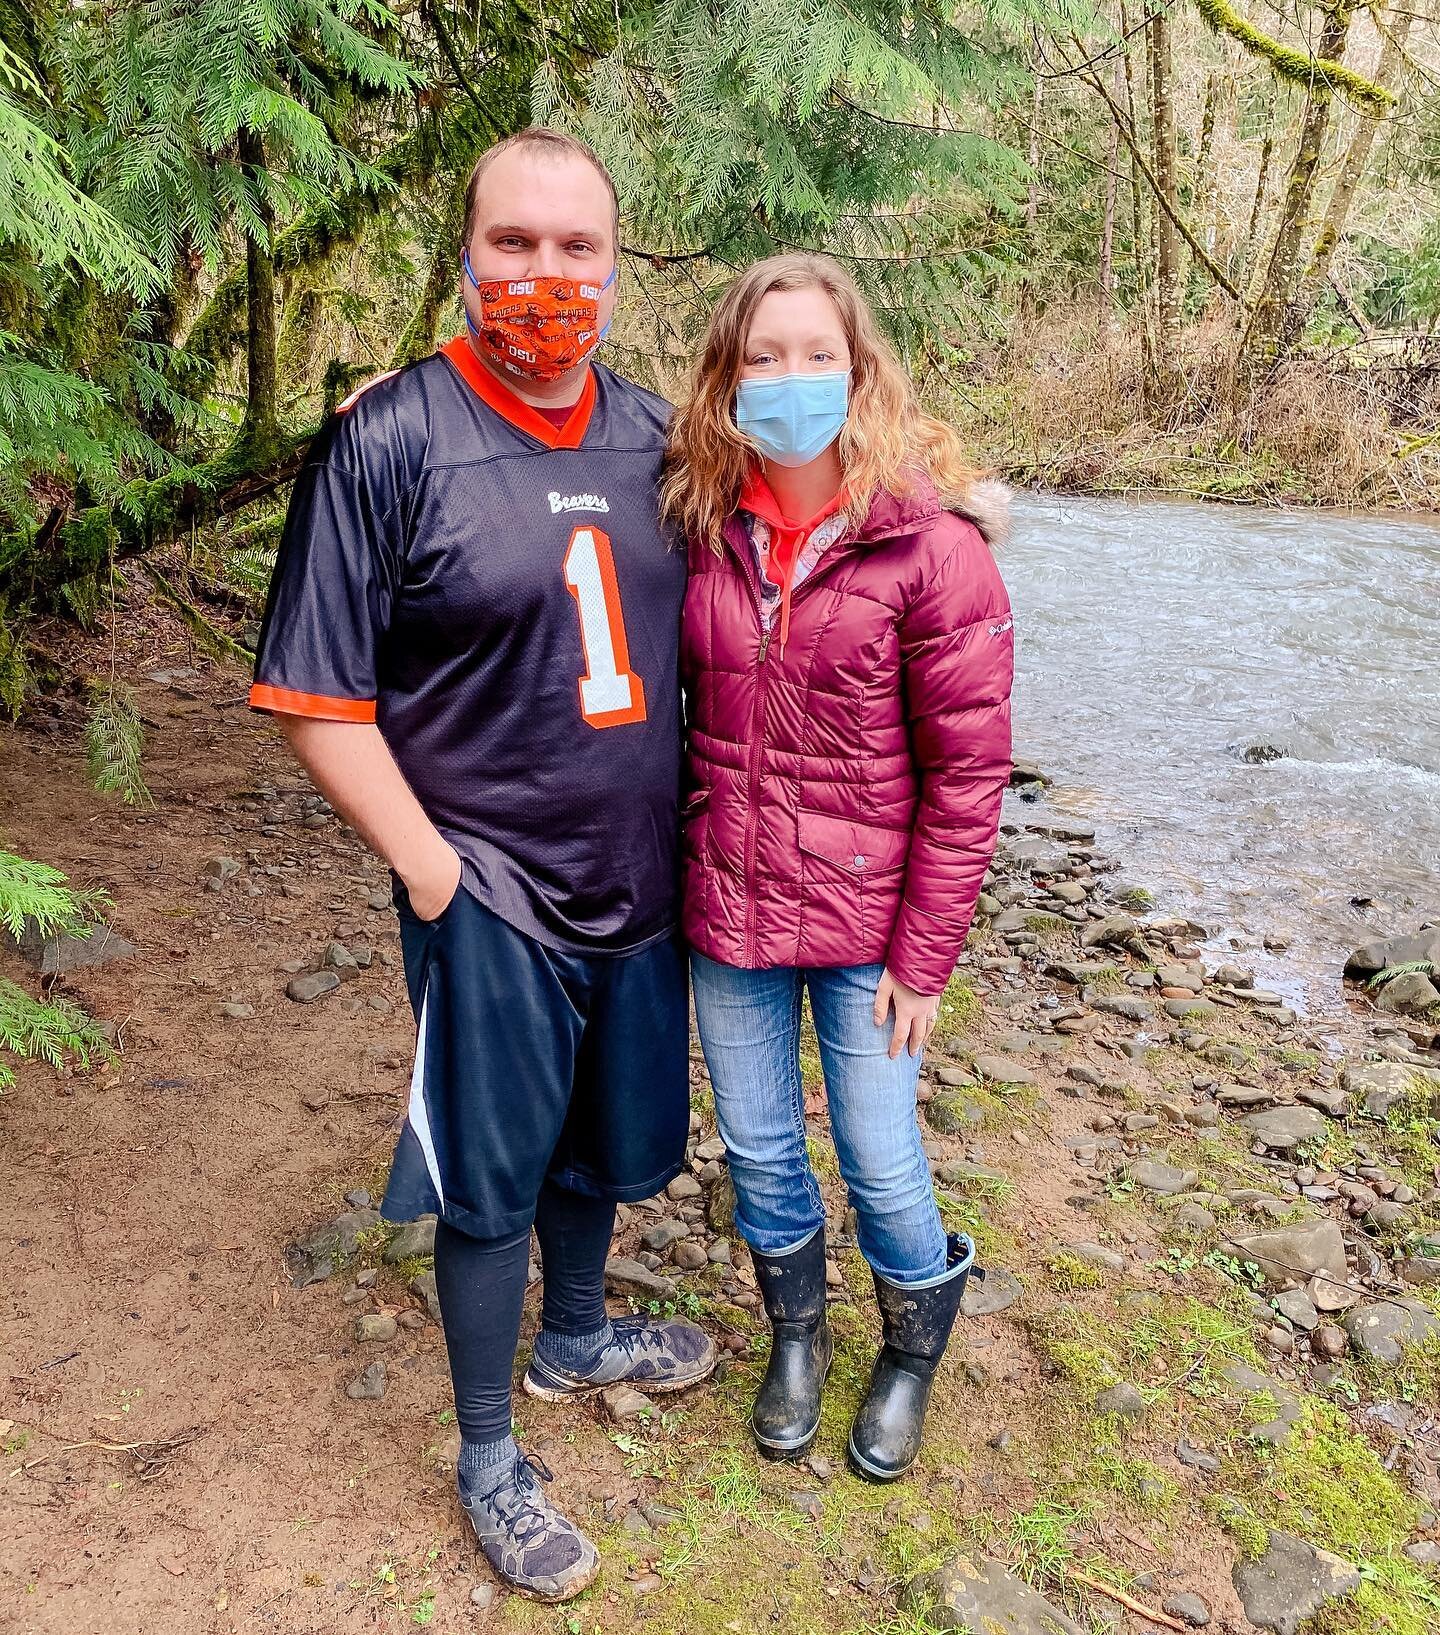 This weekend we celebrated the @specialolympics Polar Plunge!

This time last year I was dressed as a cute piggy and ran into the frigid Columbia River on my friend @jordanlindahl Team Hollywood. The polar plunge helps fund special Olympics activitie